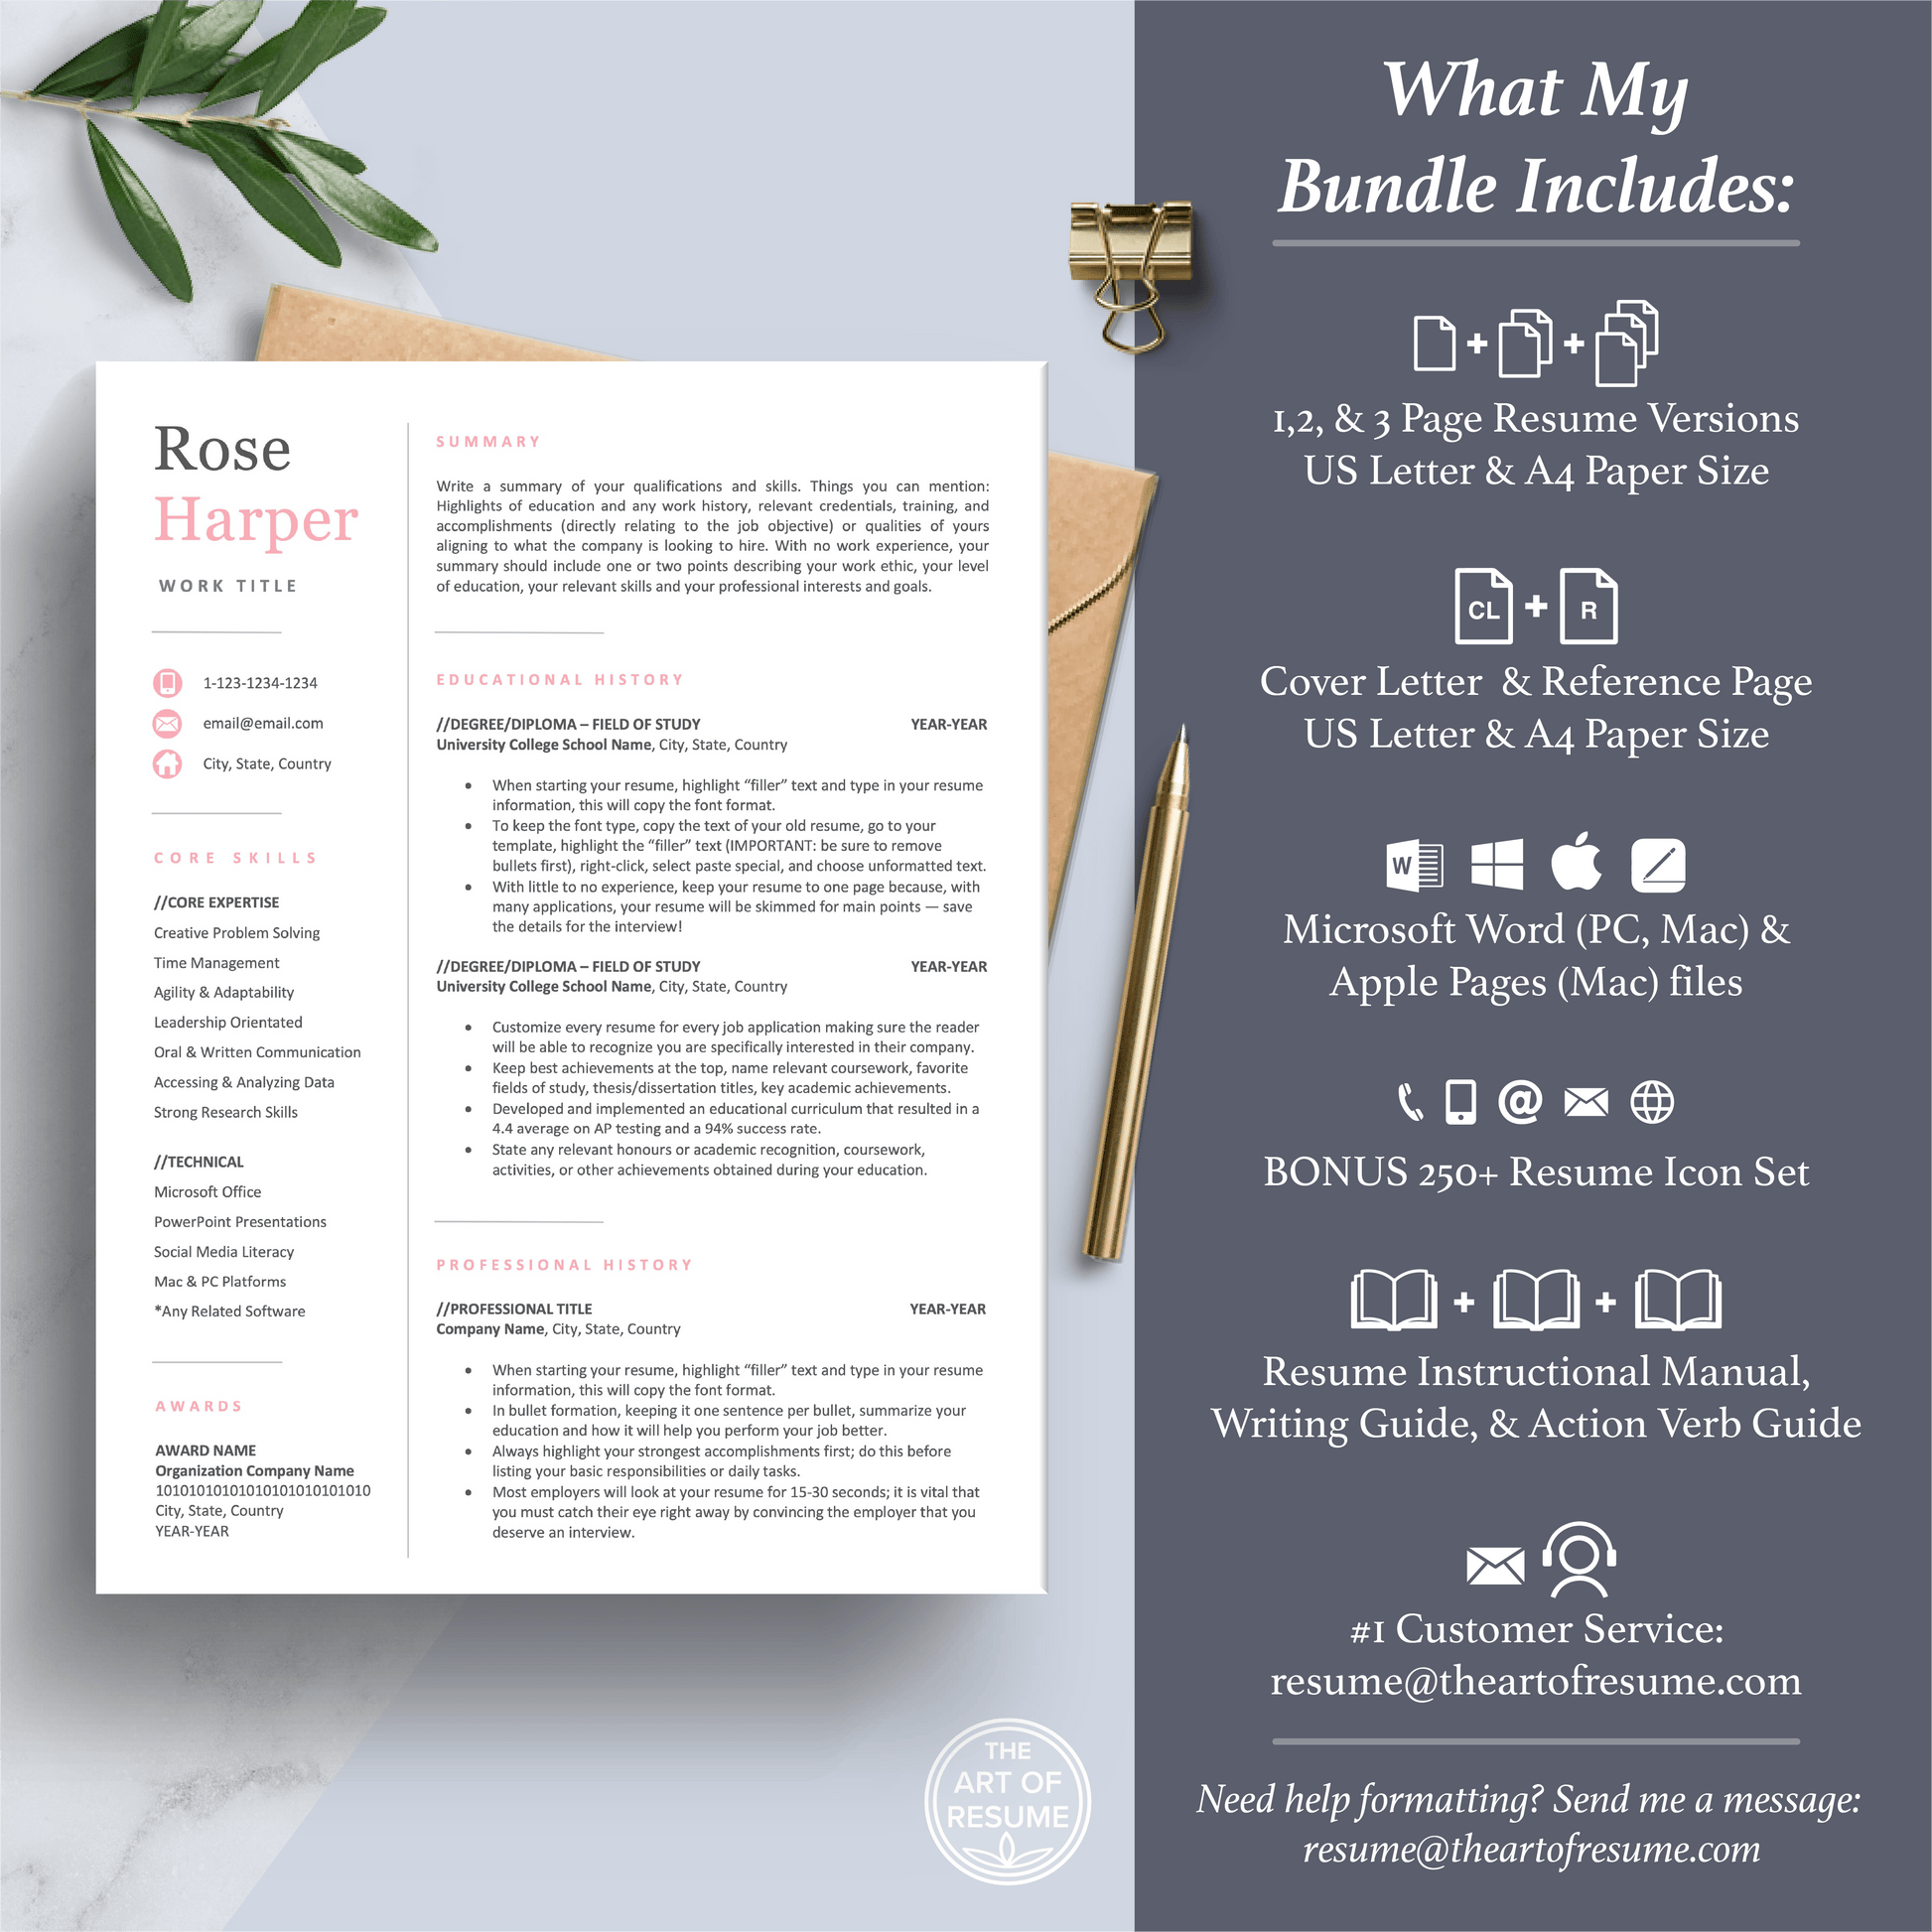 The Art of Resume Templates | Student Graduate  Resume CV Template Maker 3, Cover Letter, Reference Page, Mac, PC, A4 Paper, US size, Free Guide, The Art of Resume Writing, 250 Bonus Resume Icons